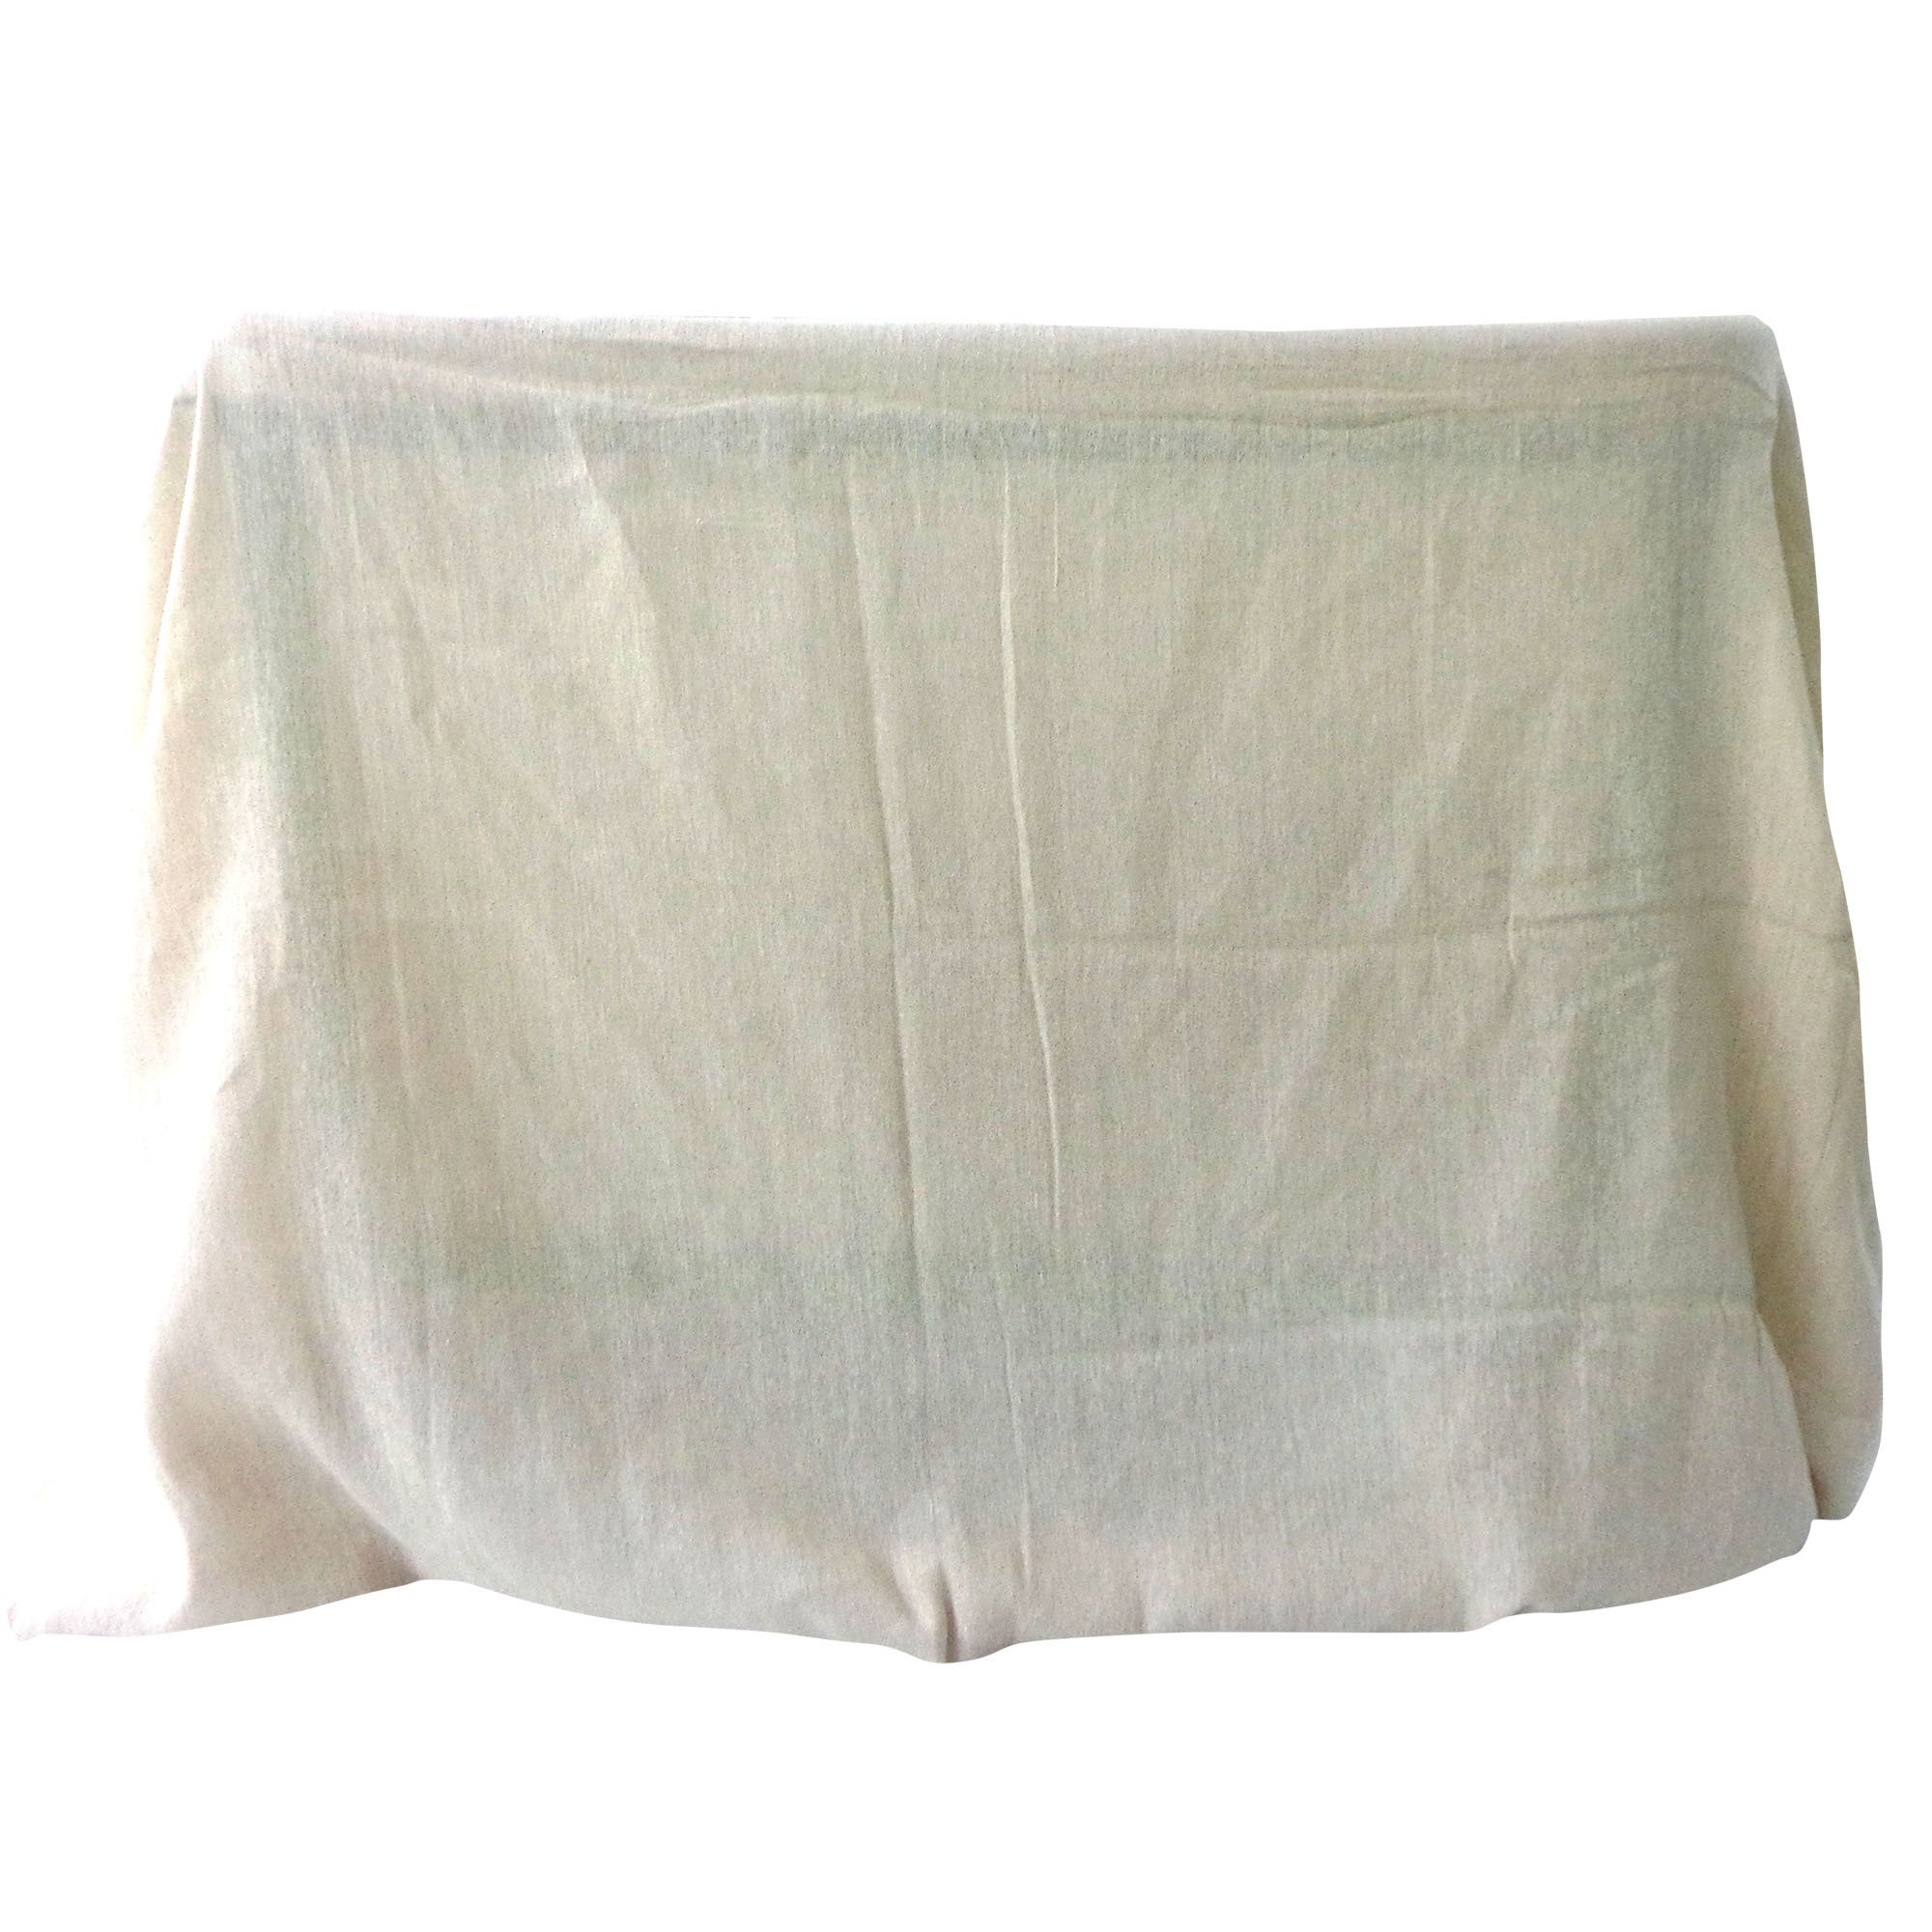 GoodHome Cotton Surface cover, (L)3.67m, (W)2.74m